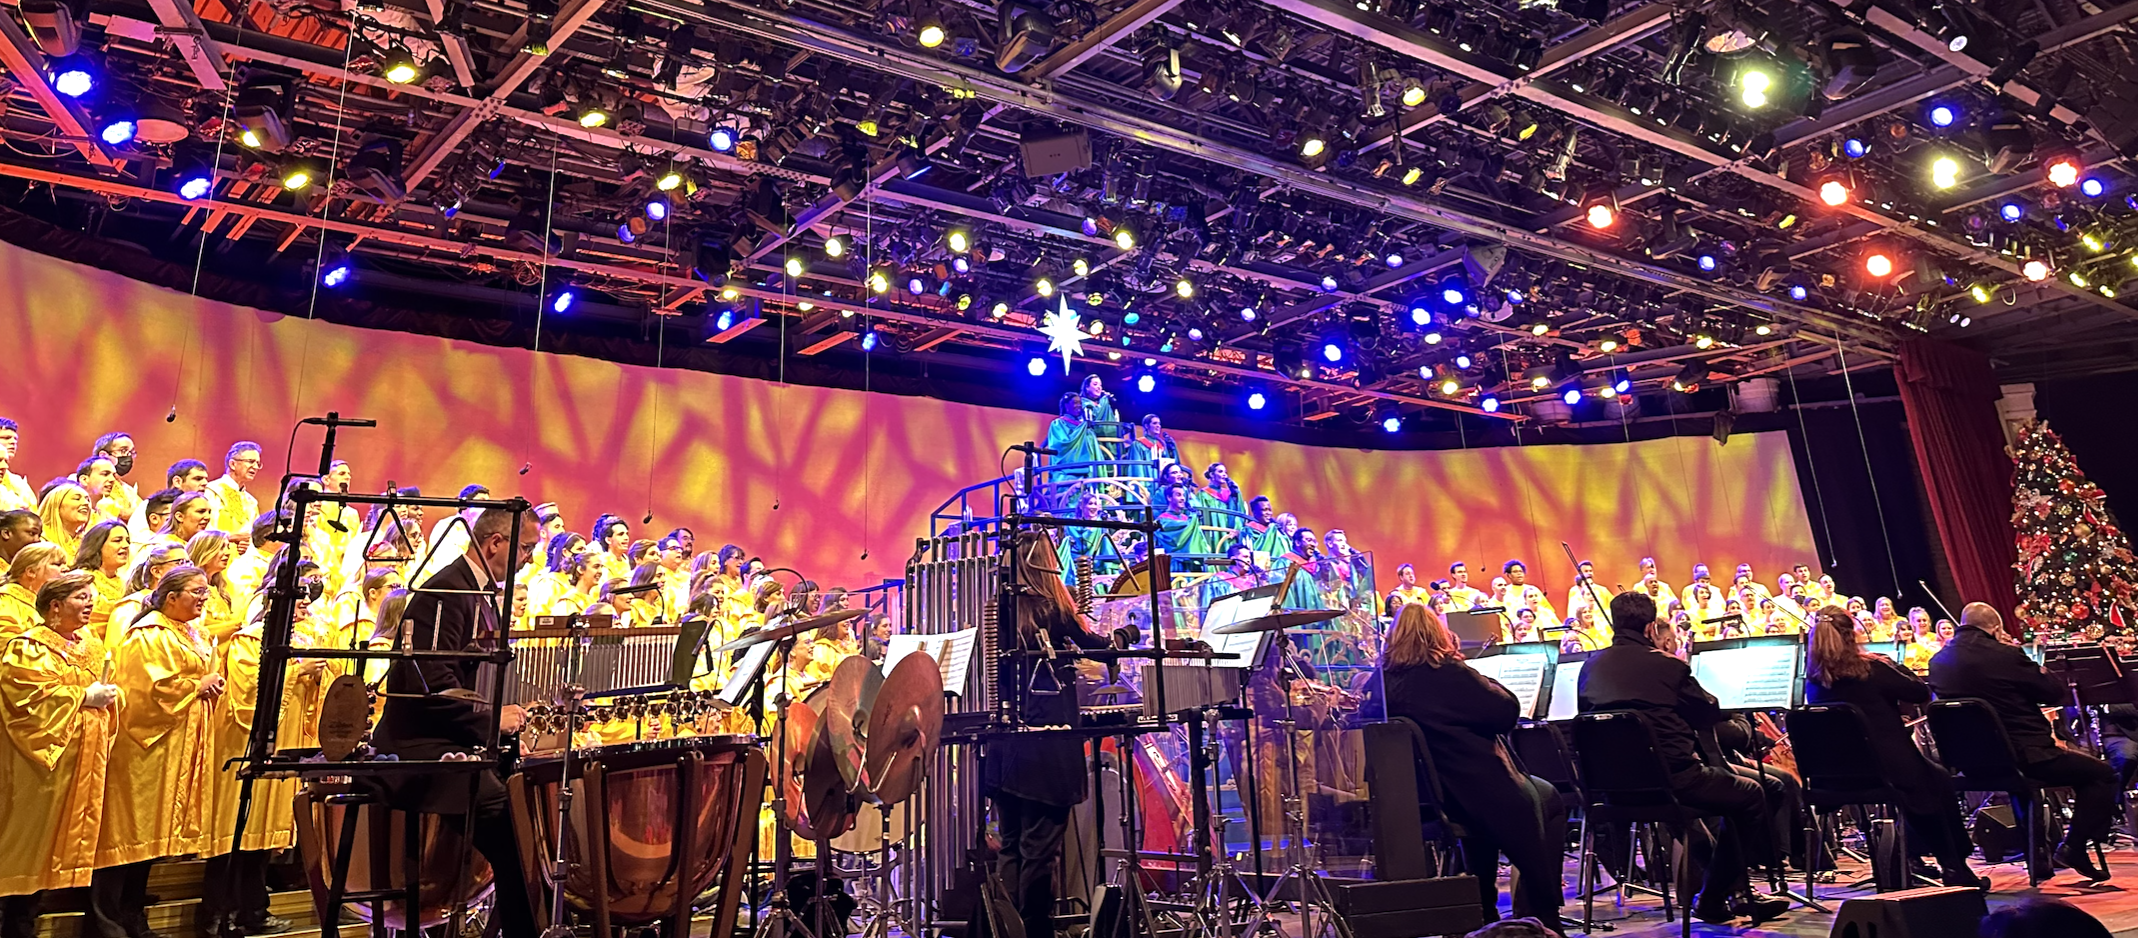 Candlelight Processional Review